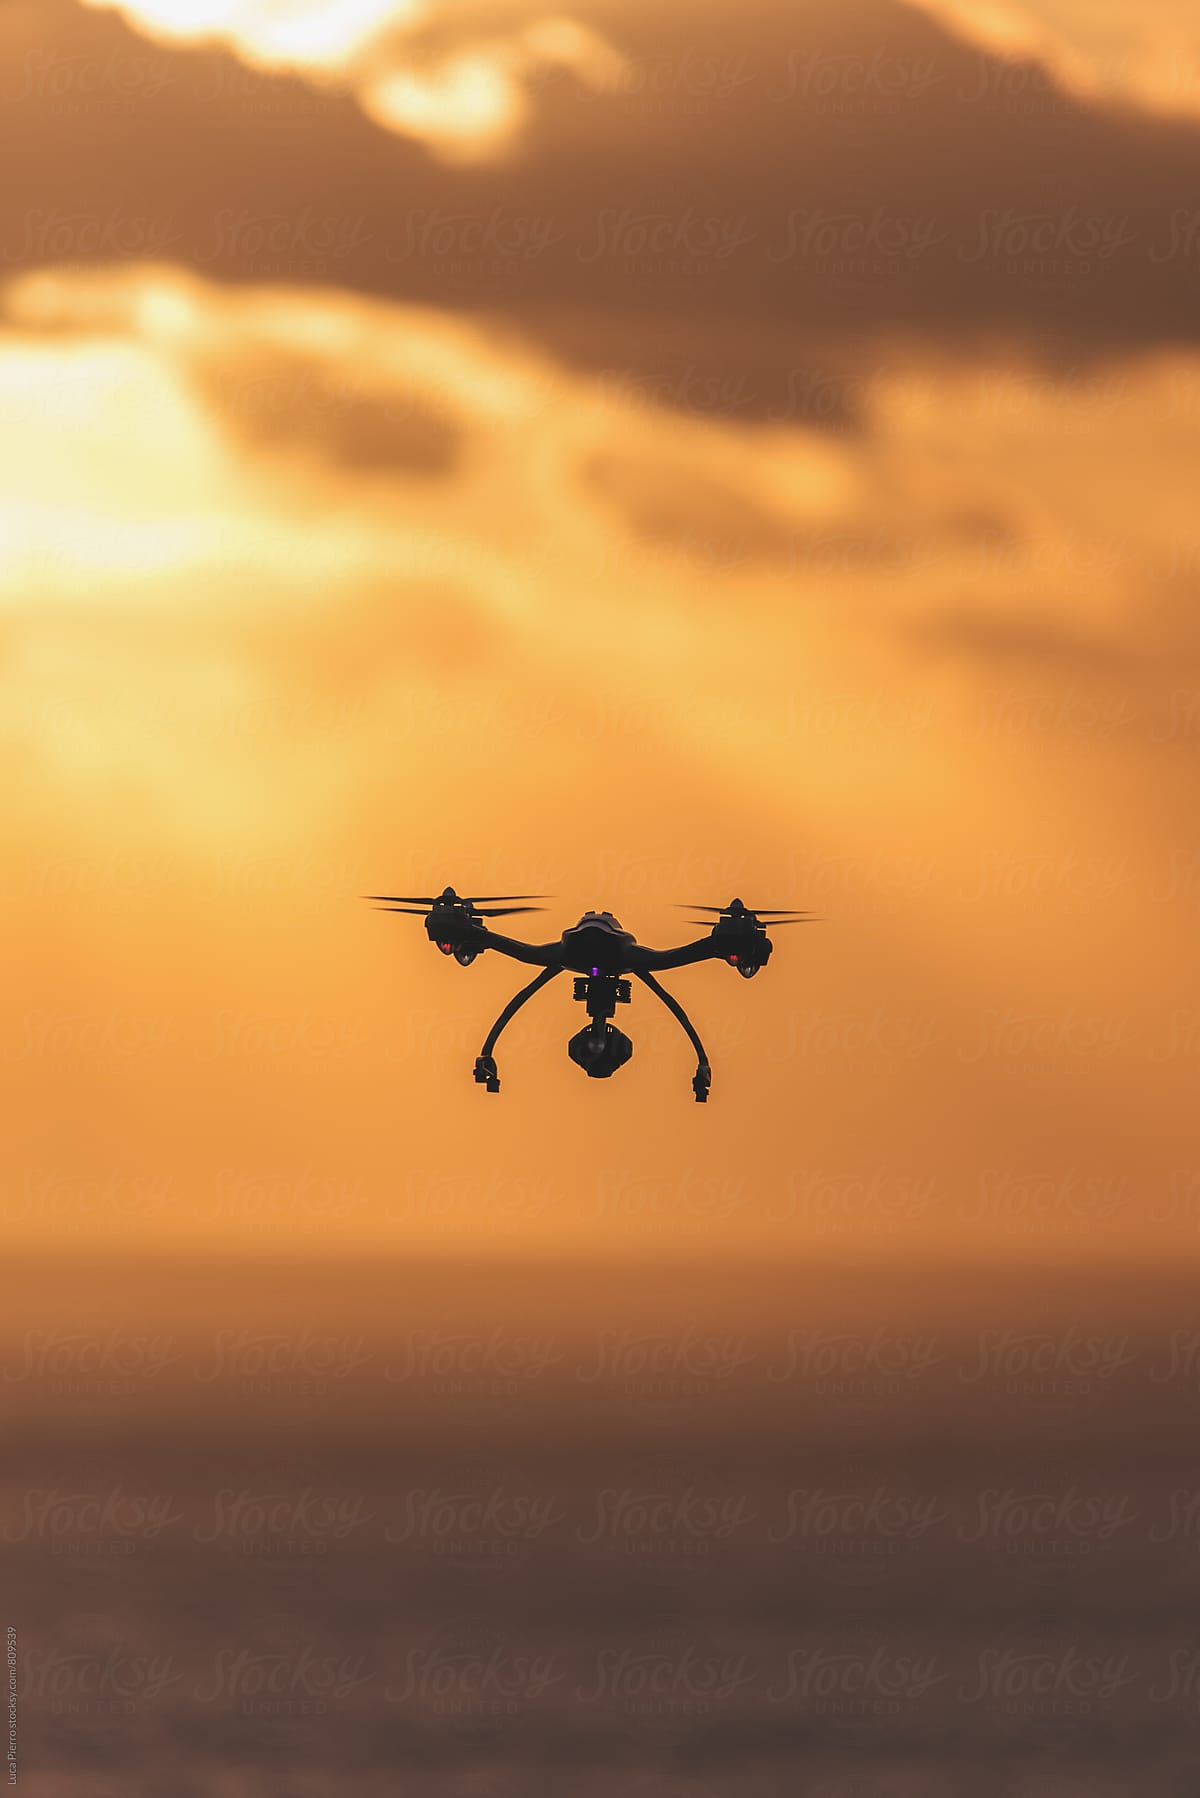 Drone flying in the cloudy sunset